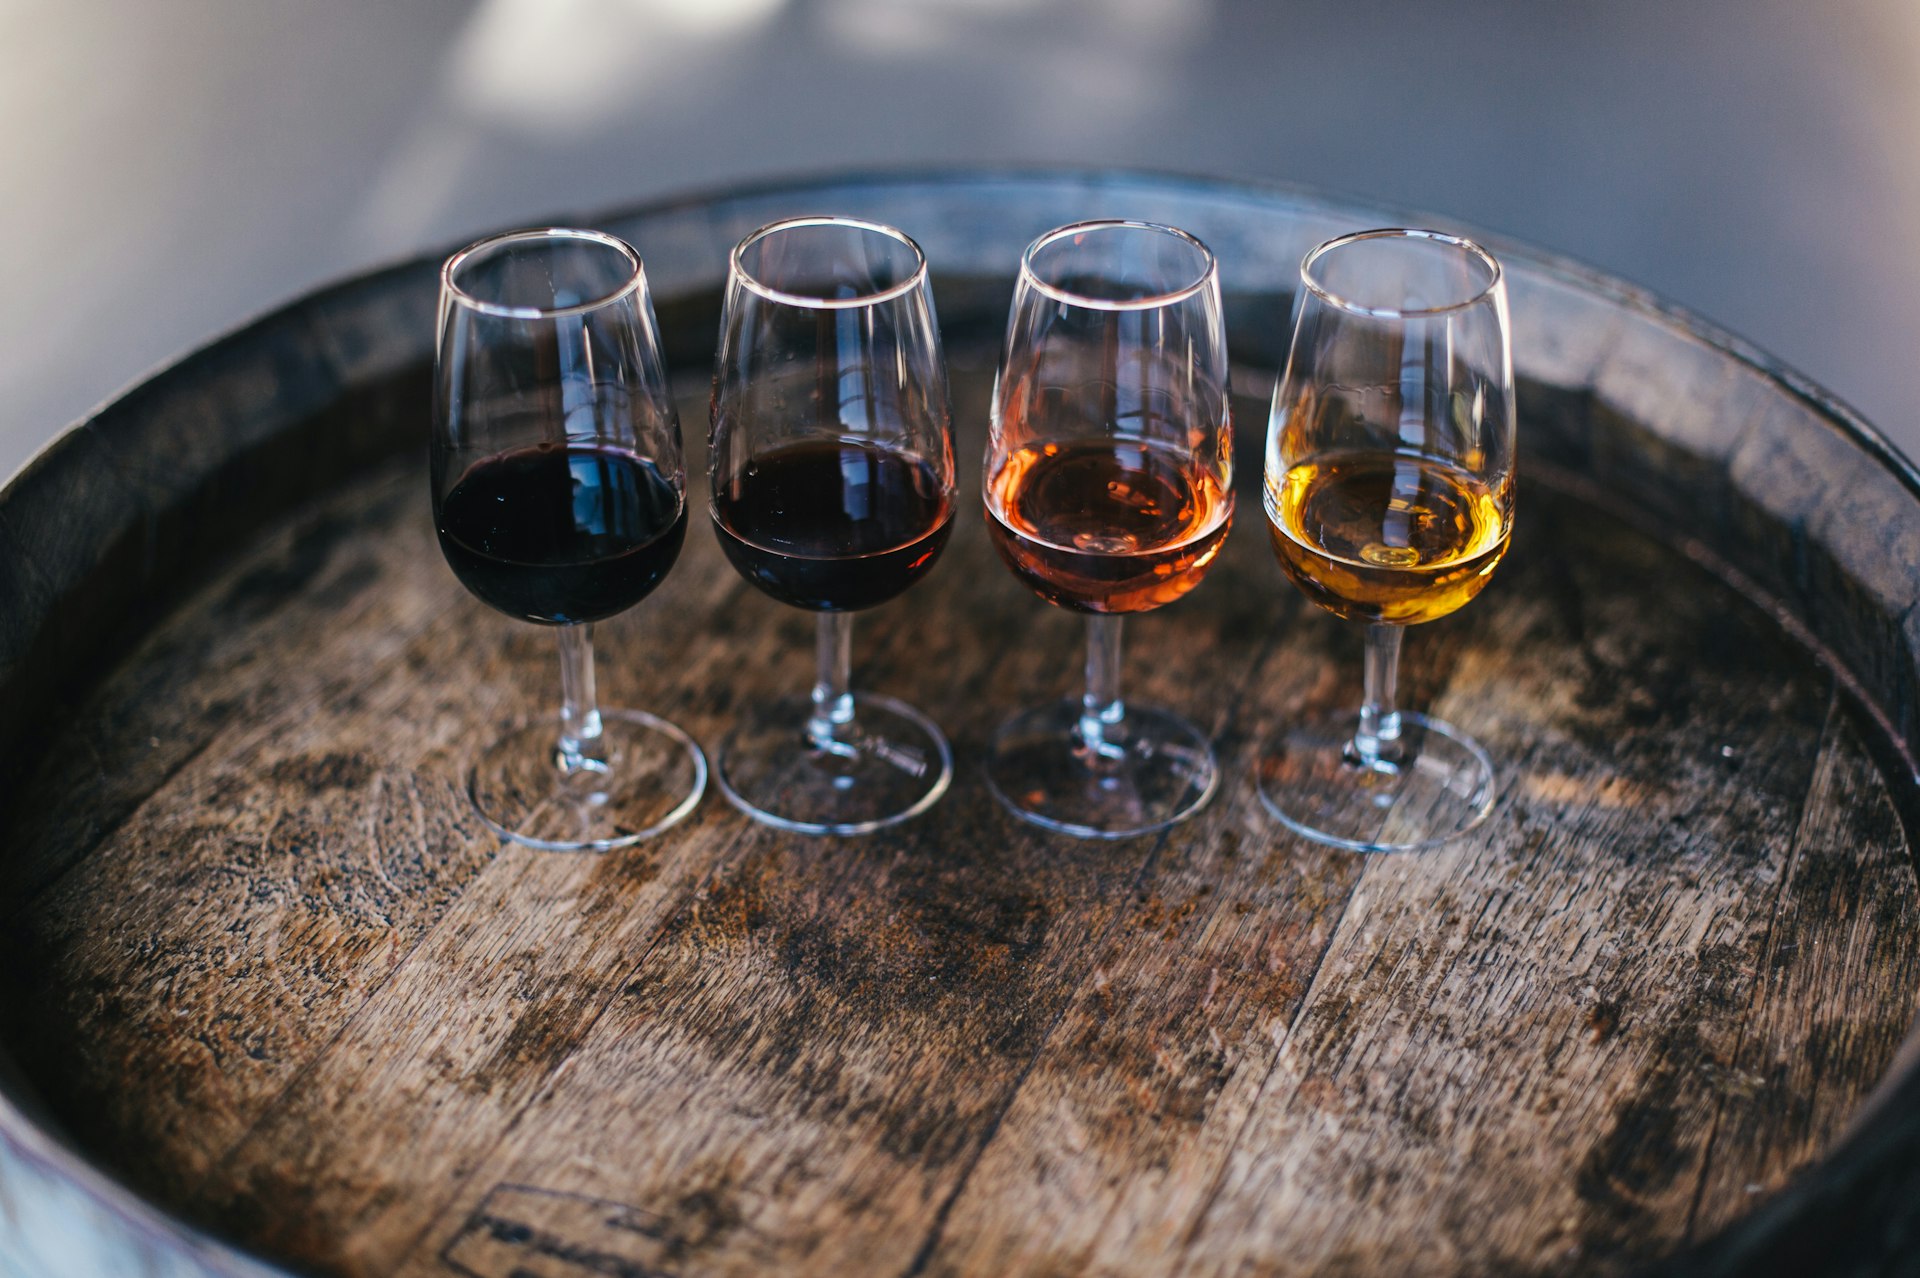 Four different types of port produced in Porto, Portugal, in glasses on a wooden barrel